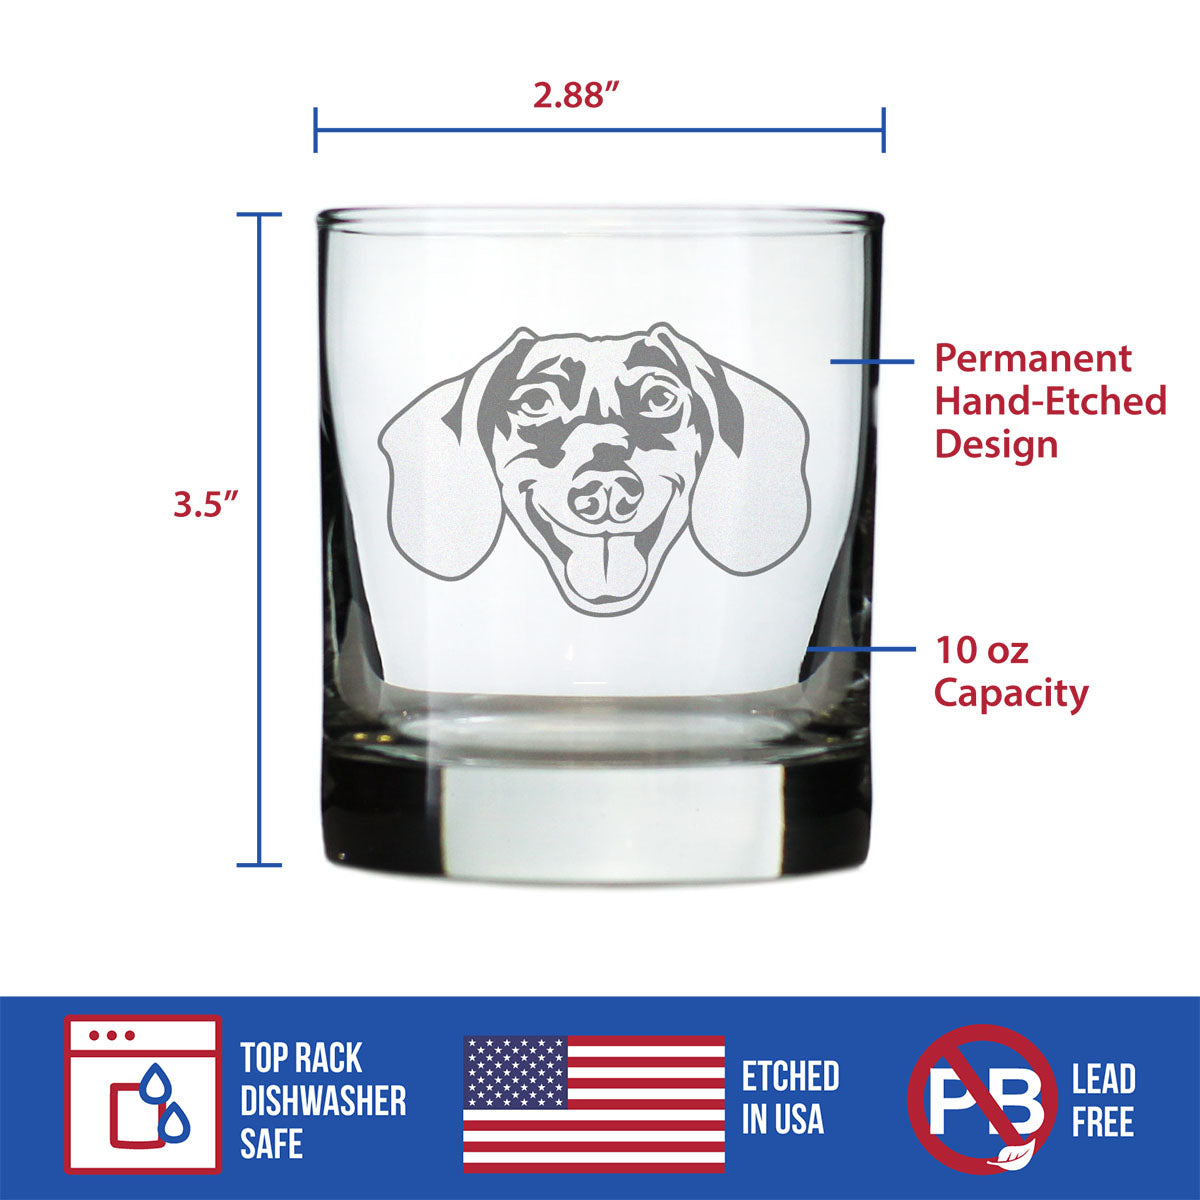 Dachshund Face Whiskey Rocks Glass - Unique Dog Themed Decor and Gifts for Moms &amp; Dads of Dachshunds - 10.25 Oz